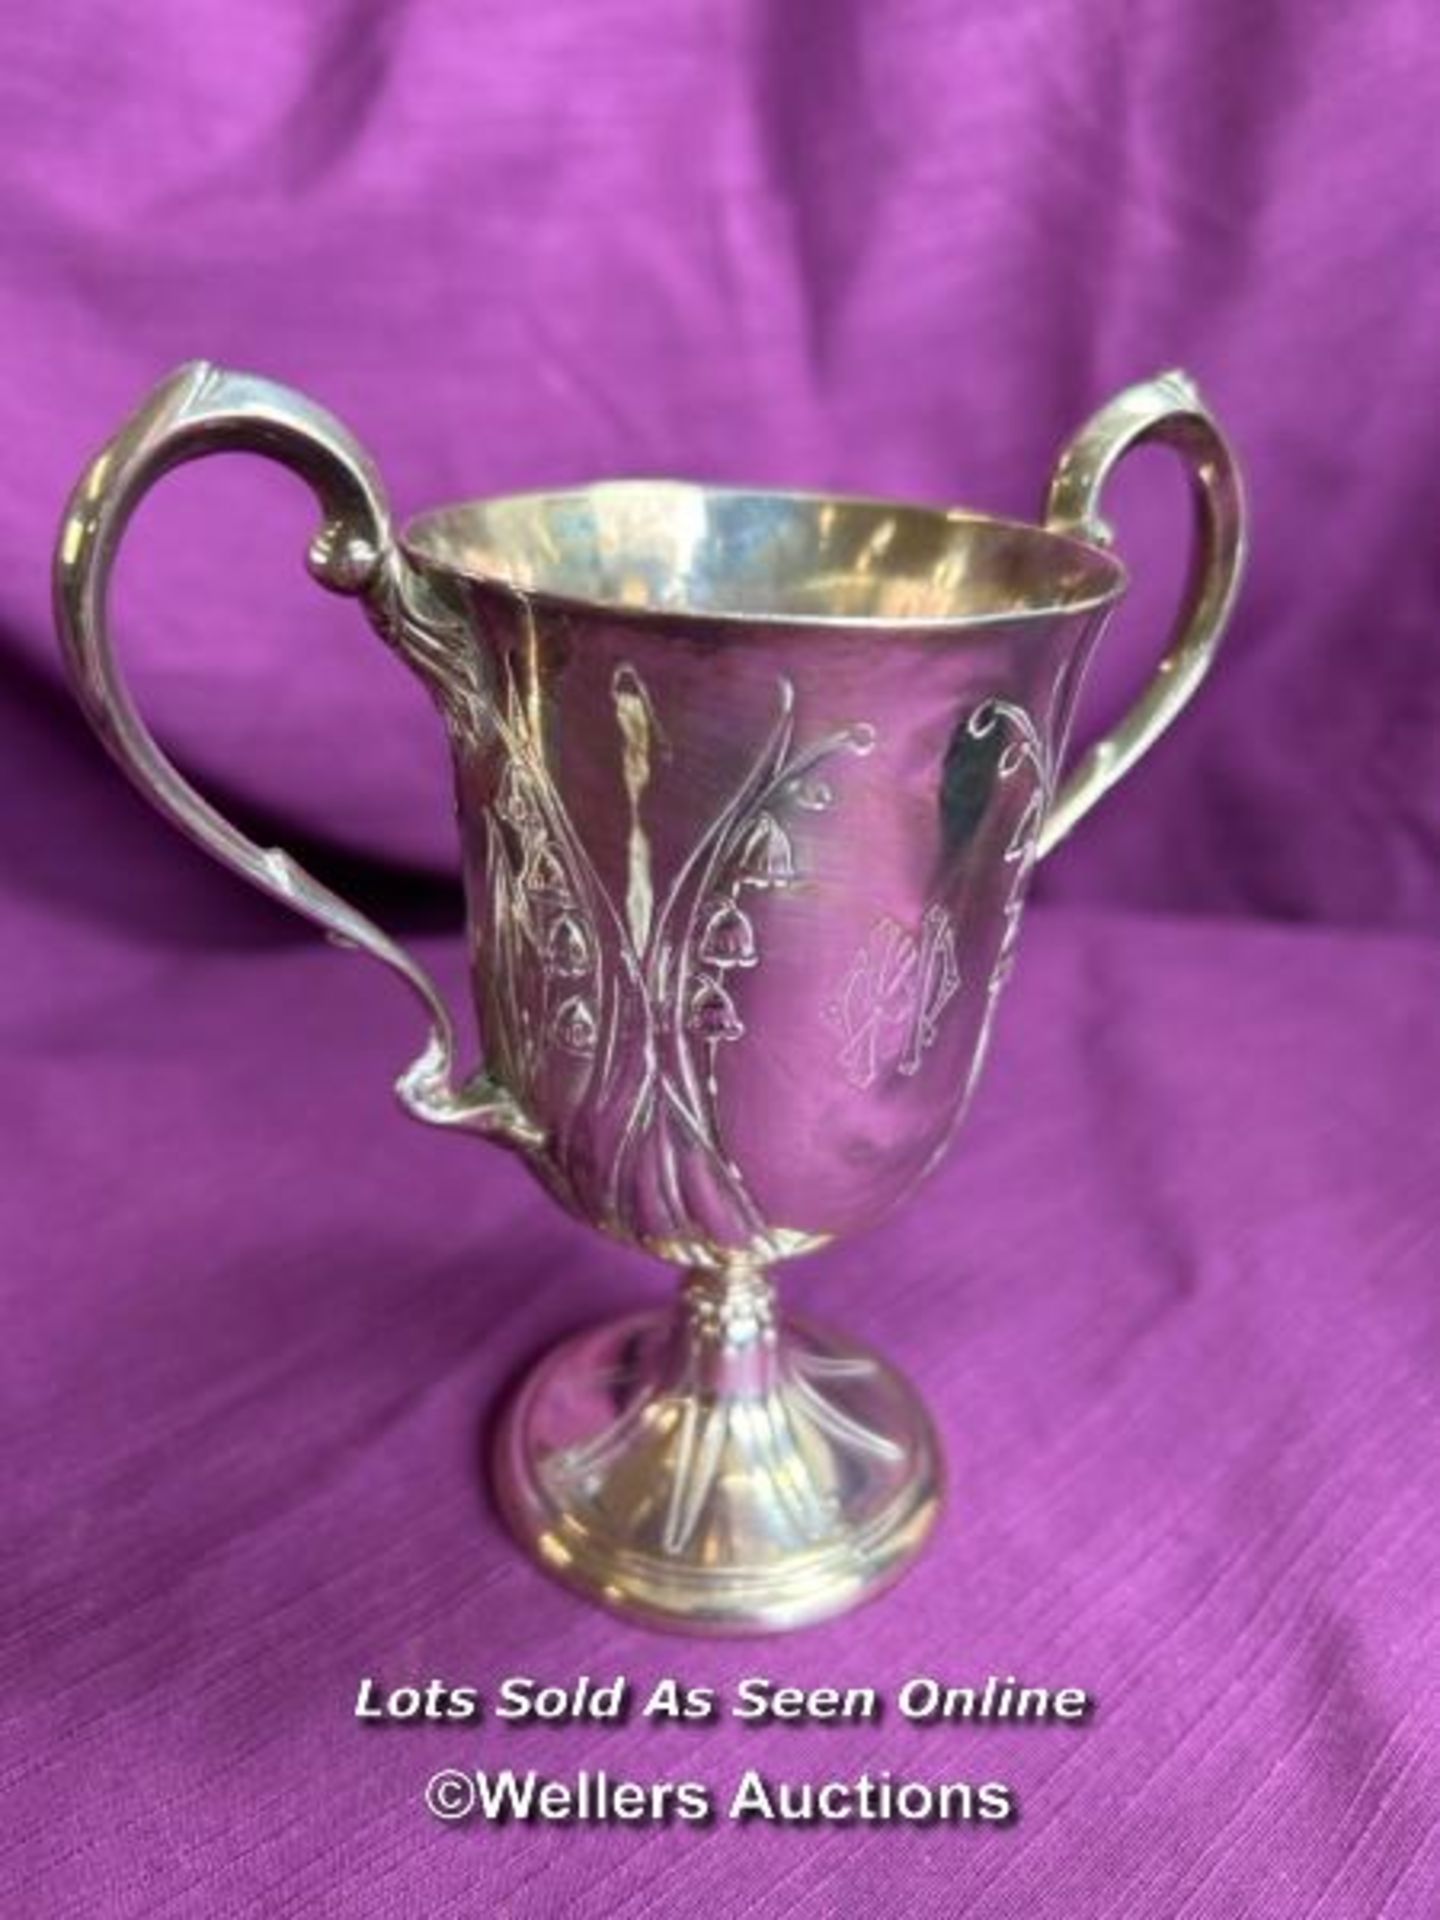 SMALL HALLMARKED SILVER TWO HANDLED DECORATIVE GOBLET, HEIGHT 13.5CM, WEIGHT 172GMS - Image 3 of 5